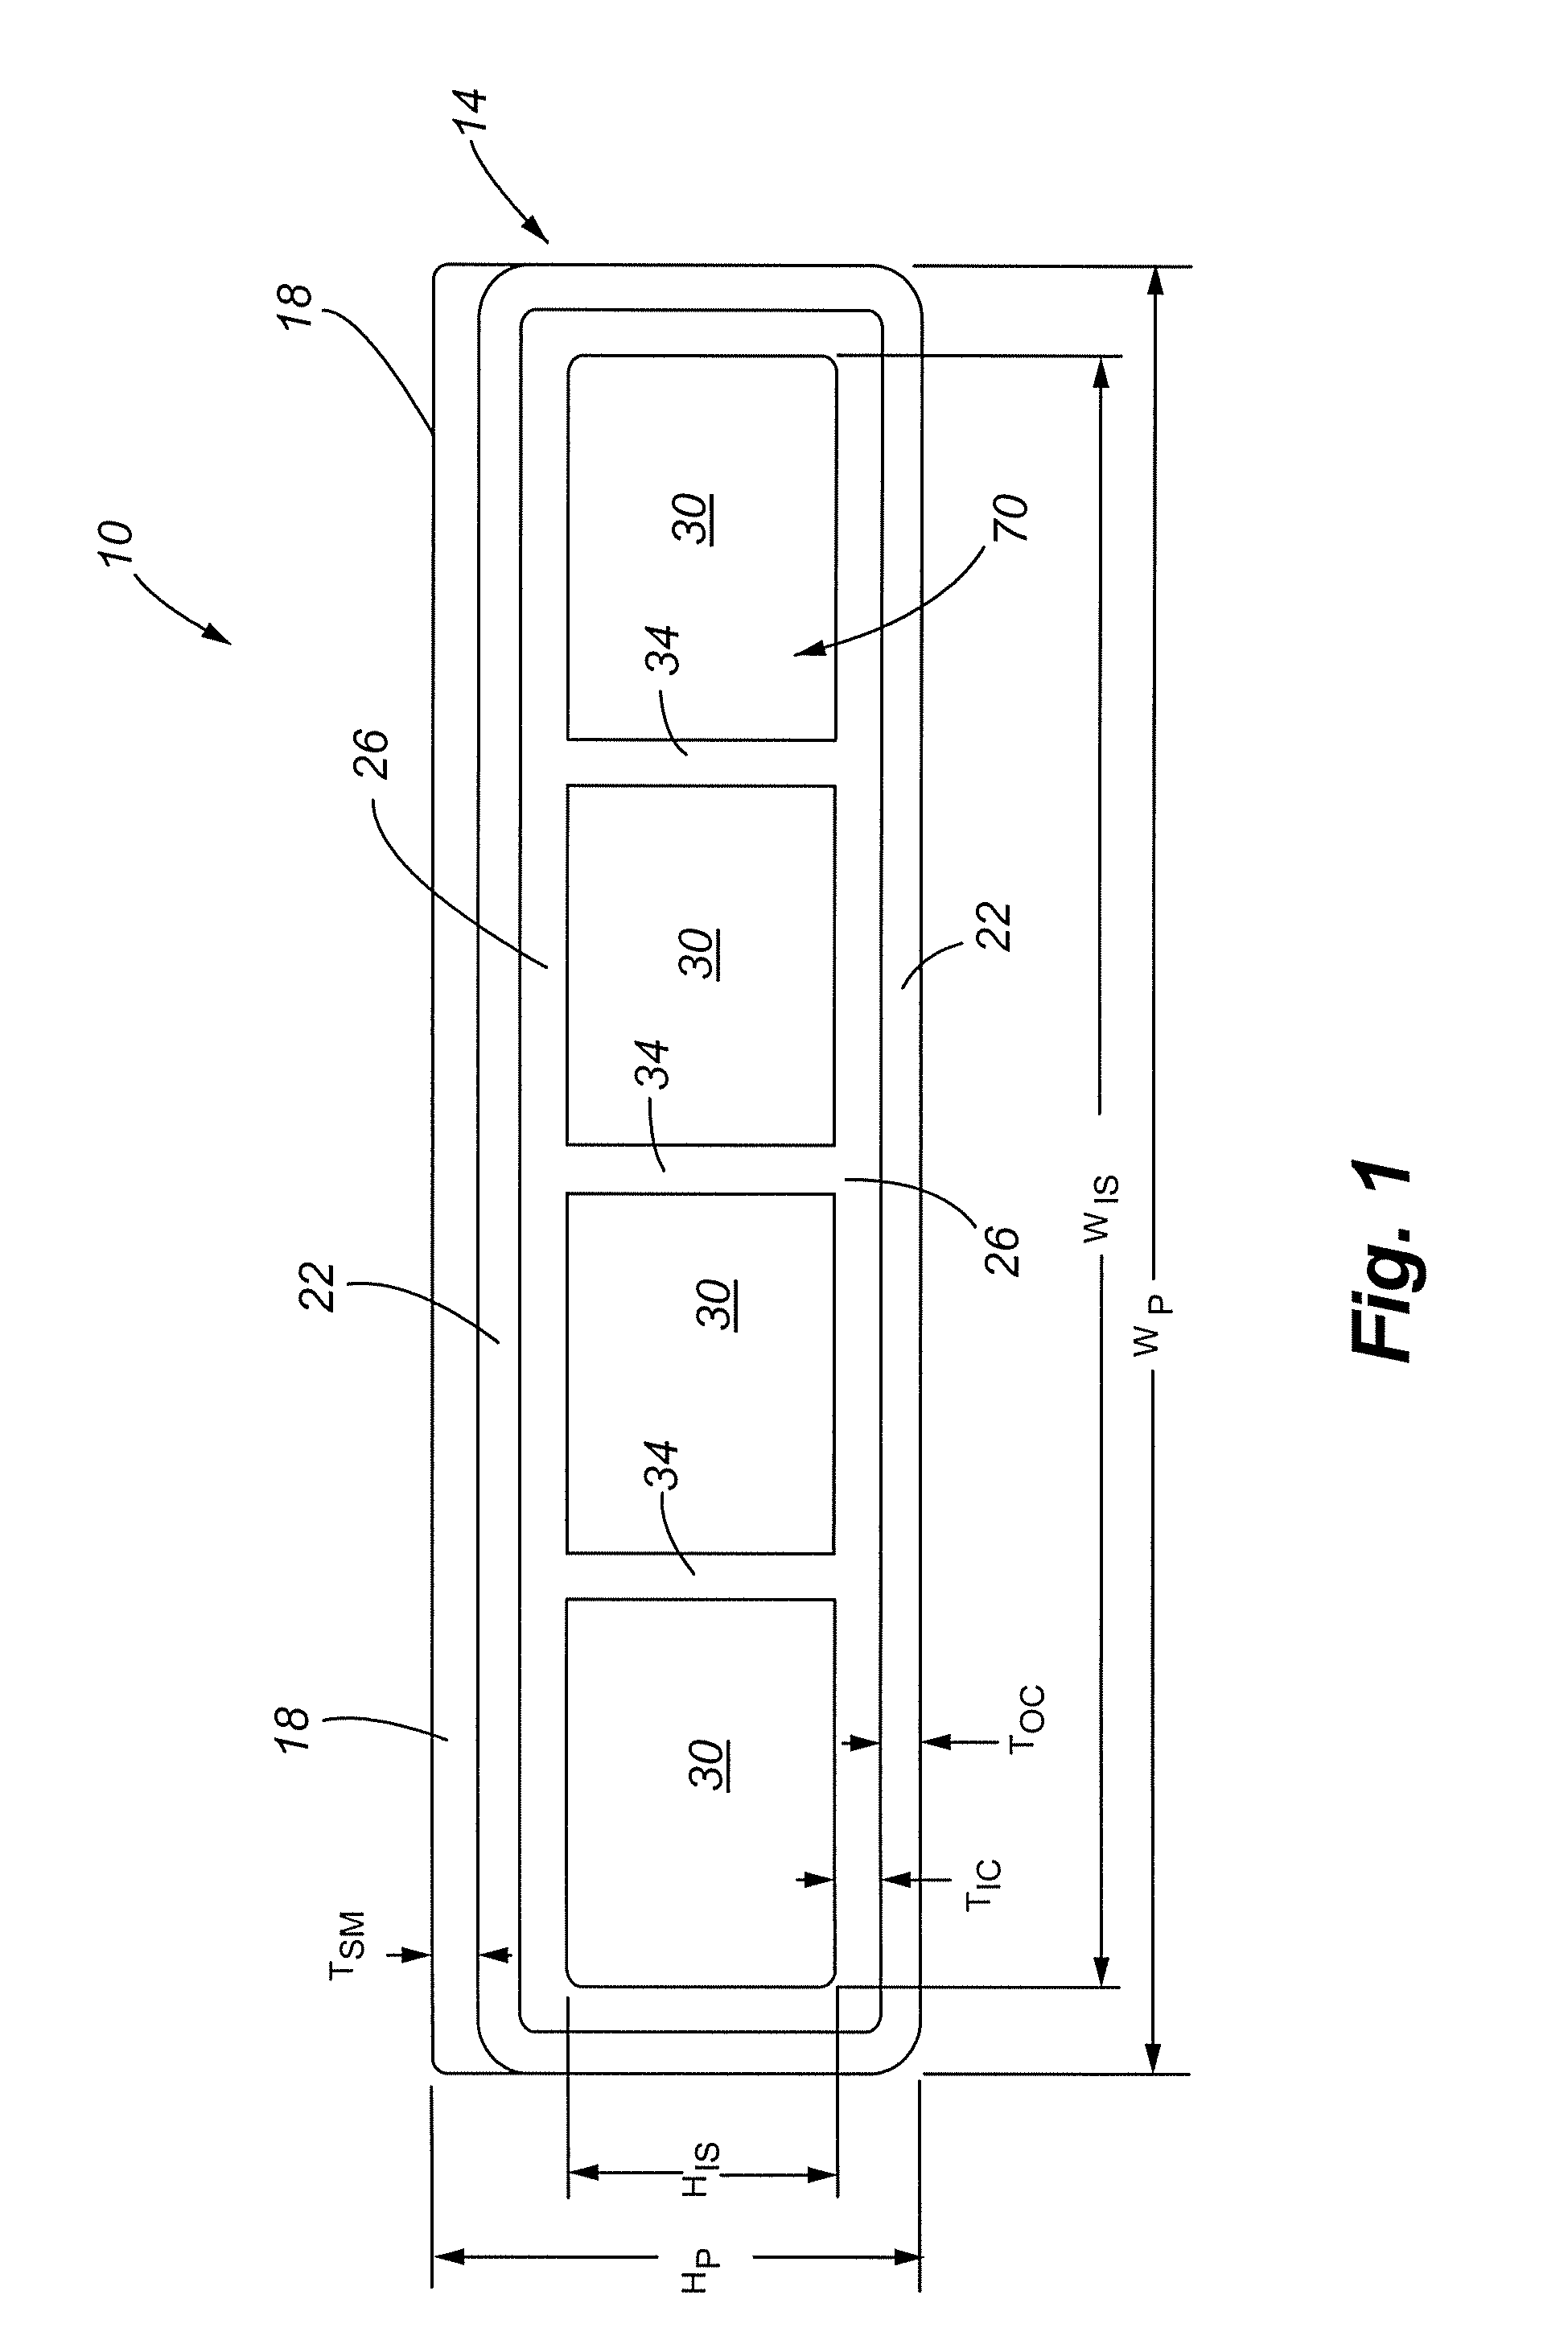 Composite decking material and methods associated with the same